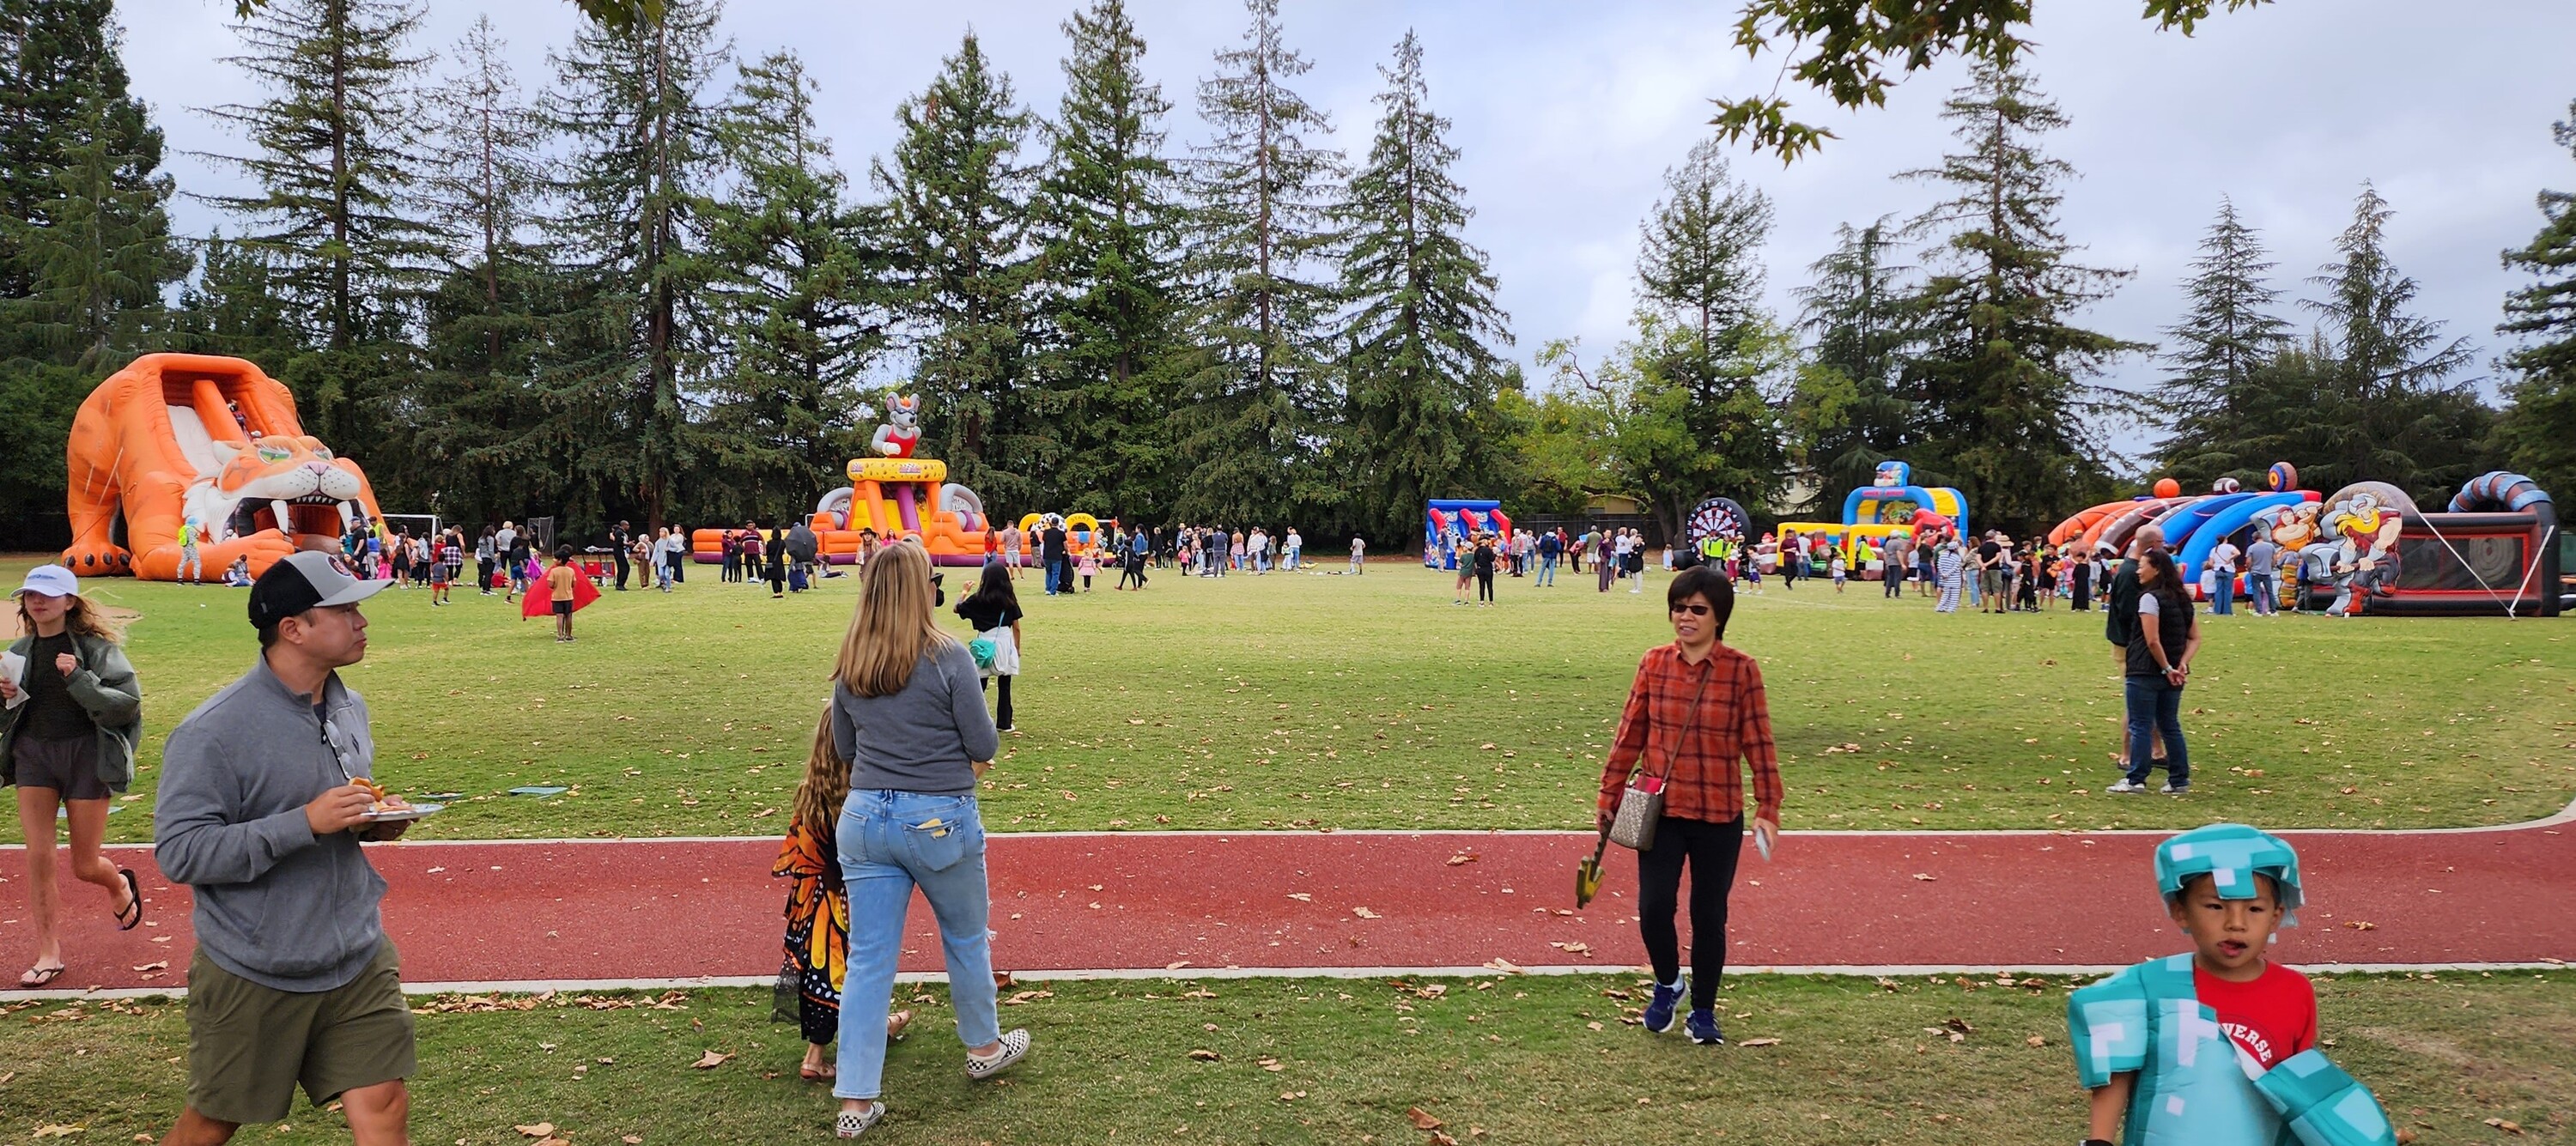 party rentals, inflatables, bounce houses and carnival games in roseville